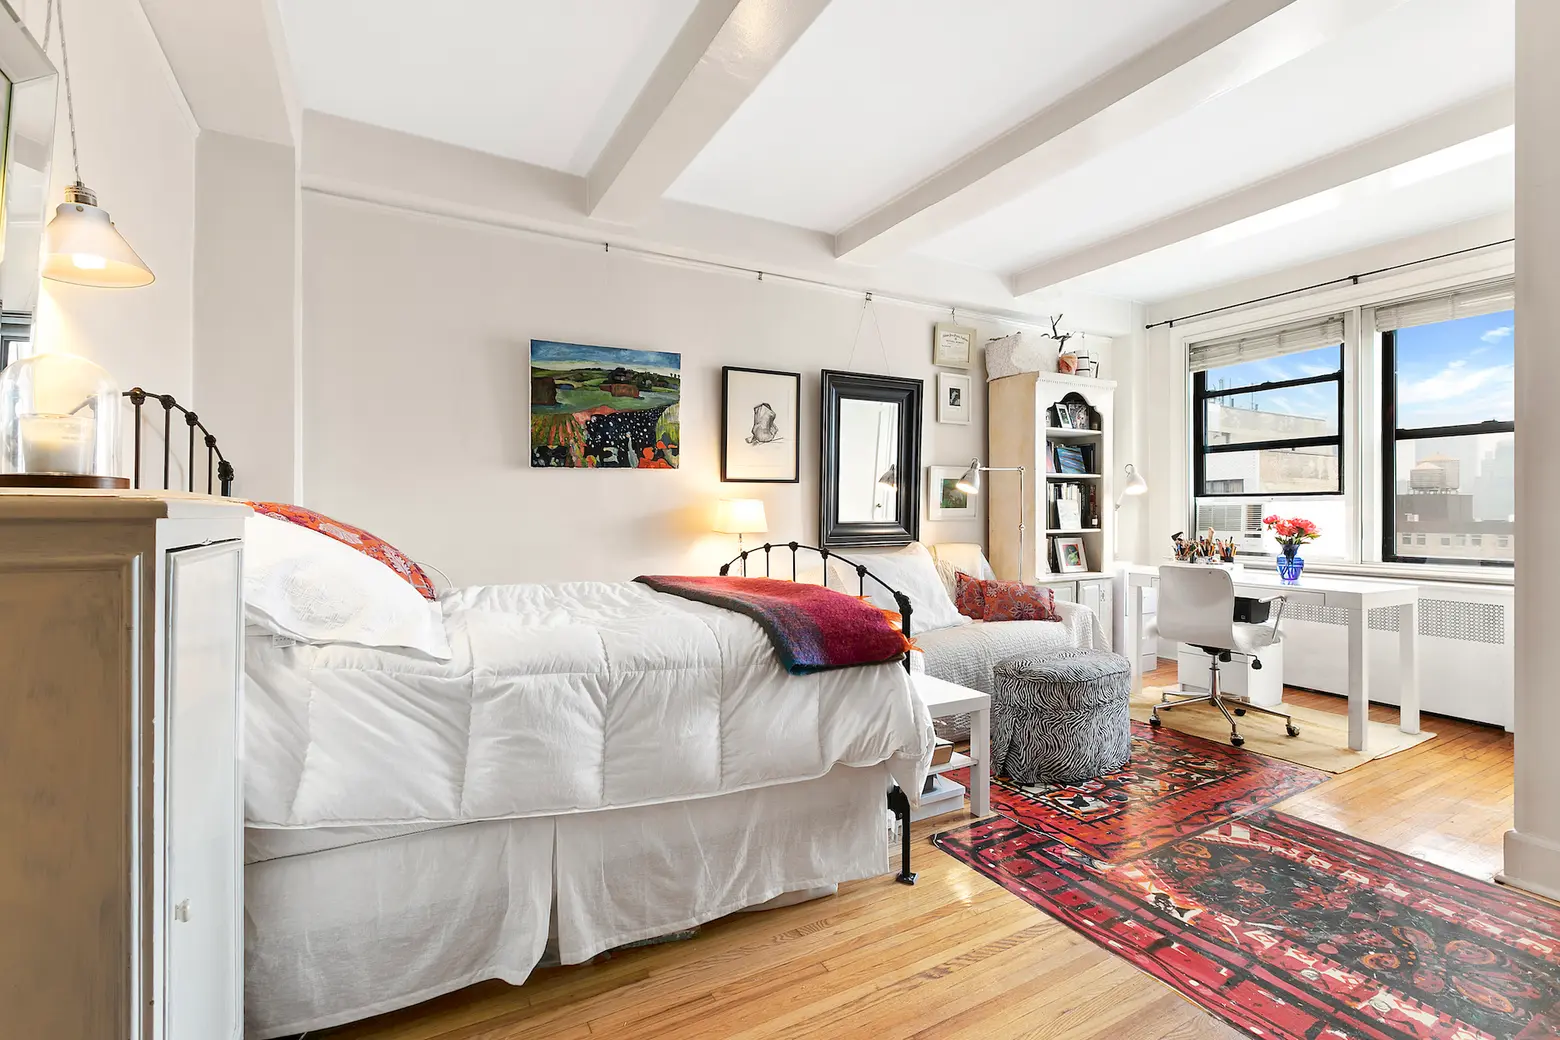 For $395K, this top-floor Columbus Circle studio is just two blocks from Central Park